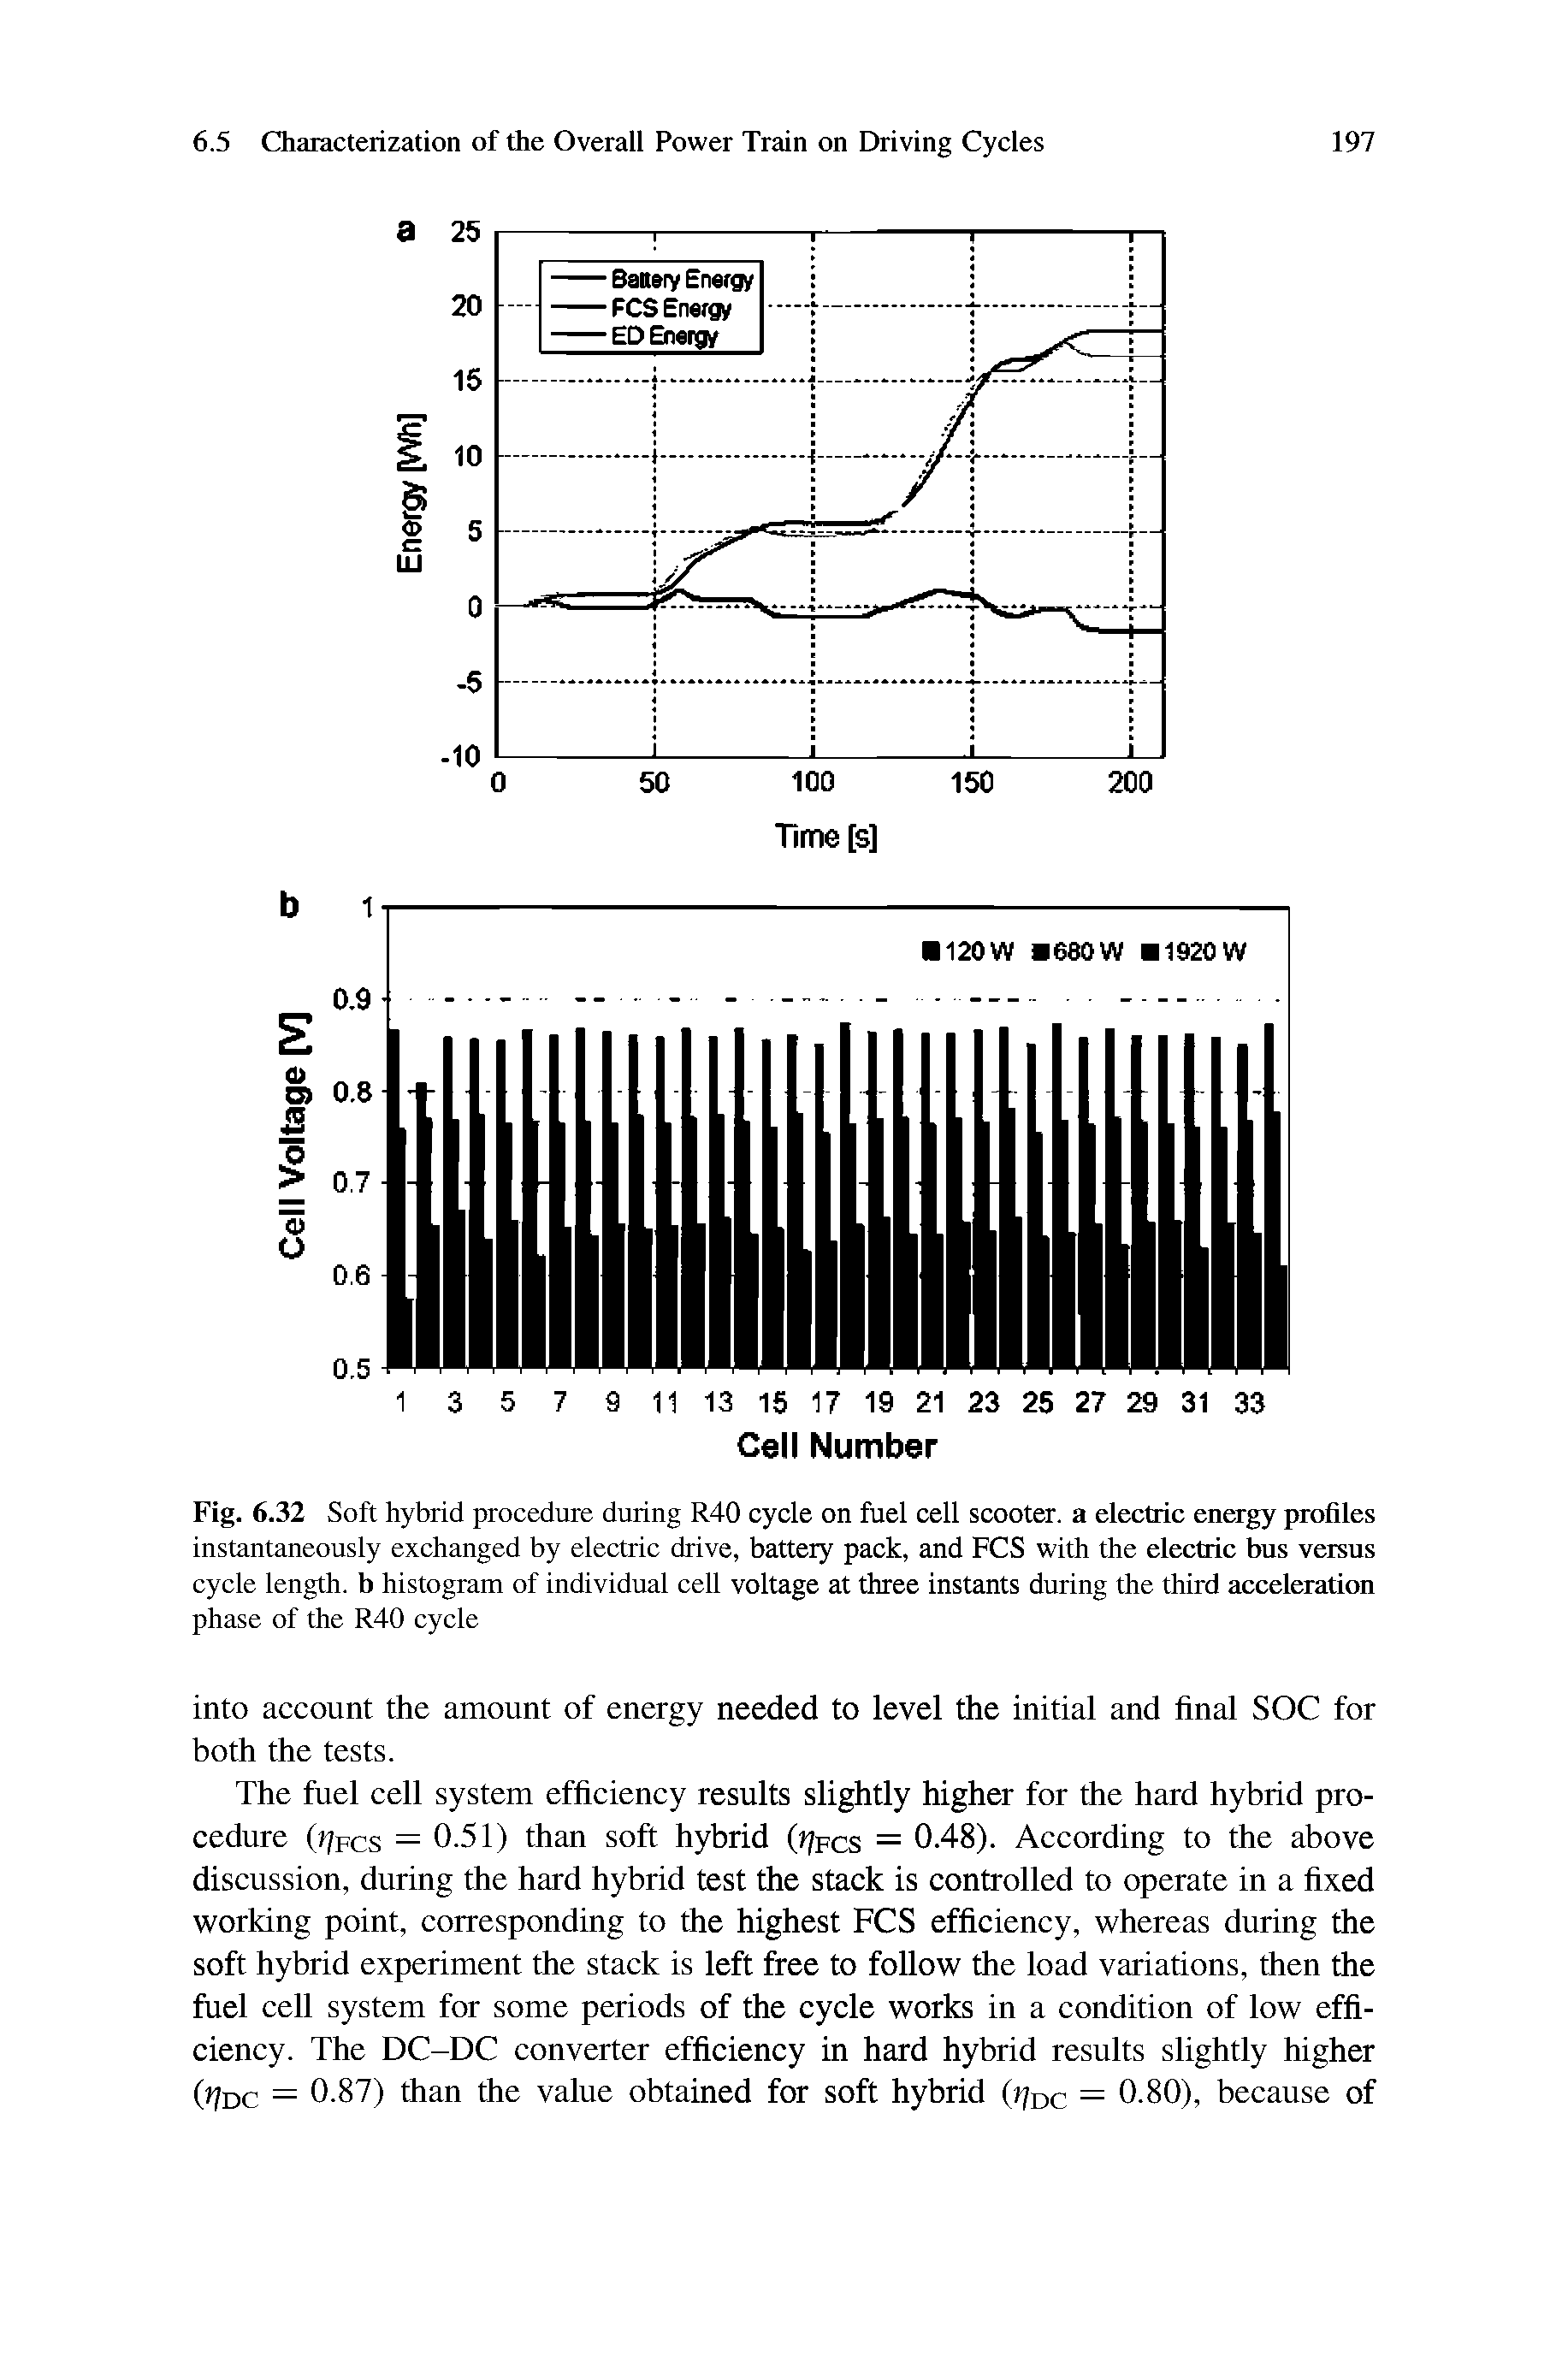 Fig. 6.32 Soft hybrid procedure during R40 cycle on fuel cell scooter, a electric energy profiles instantaneously exchanged by electric drive, battery pack, and FCS with the electric bus versus cycle length, b histogram of individual cell voltage at three instants during the third acceleration phase of the R40 cycle...